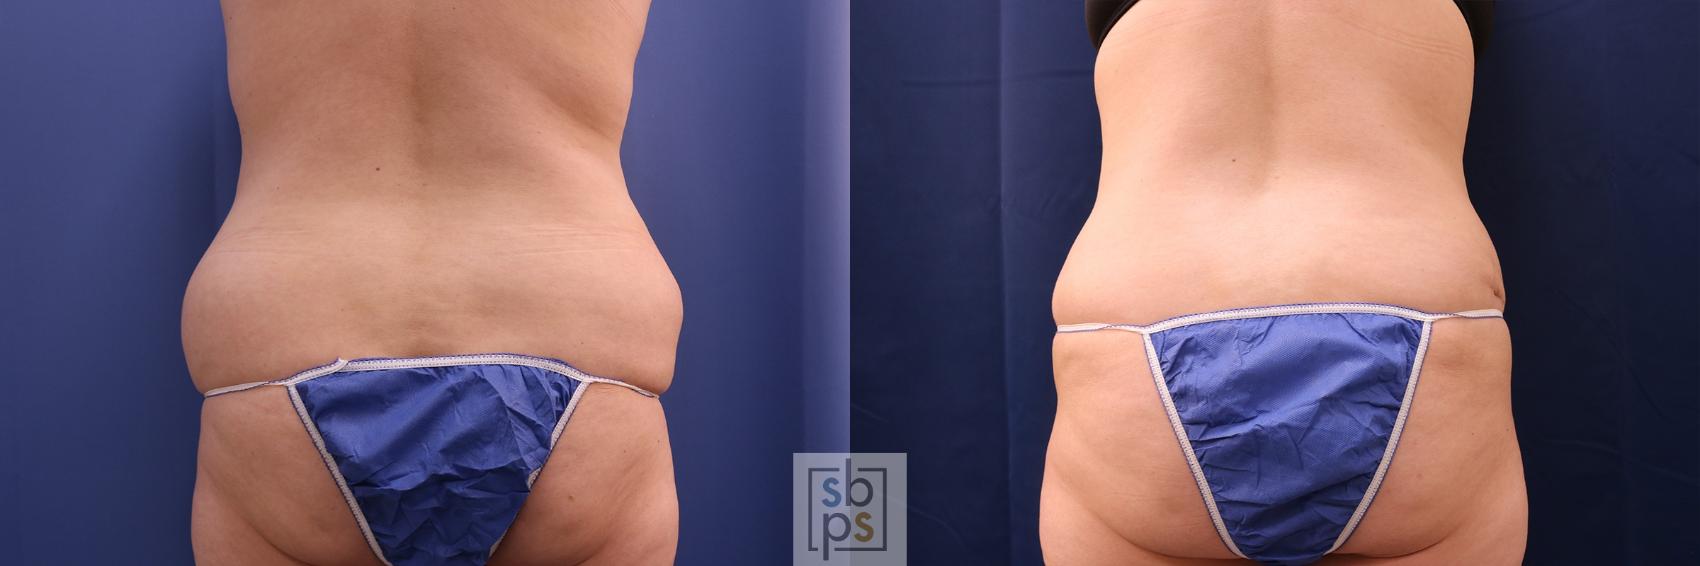 Before & After Liposuction Case 522 Back View in Torrance, CA